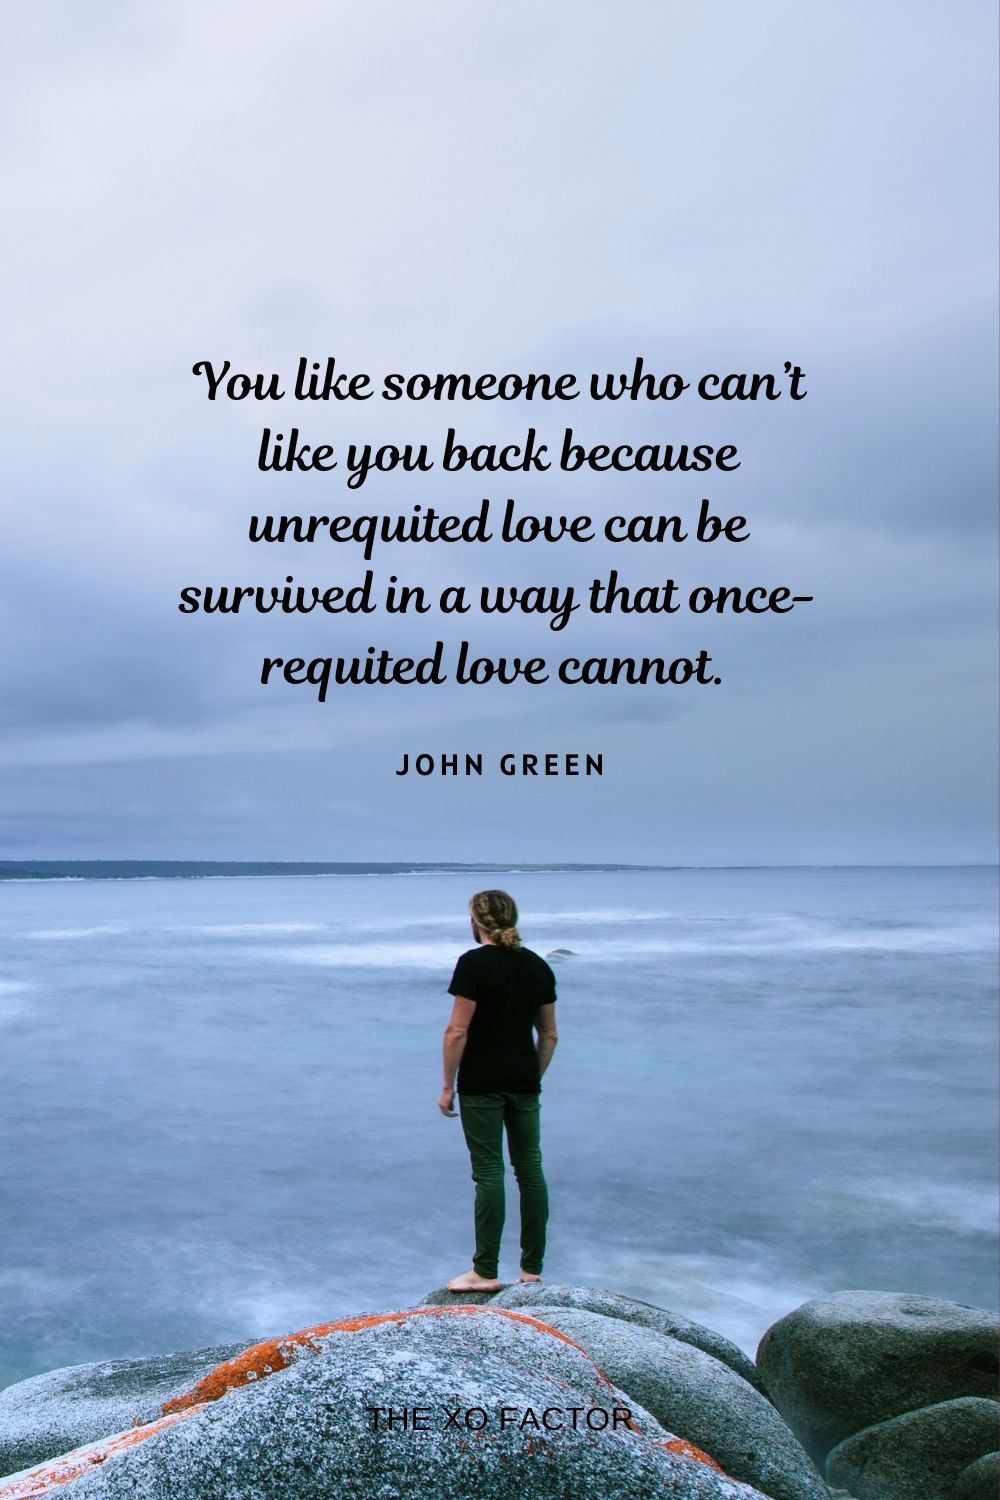 You like someone who can’t like you back because unrequited love can be survived in a way that once-requited love cannot.  John Green